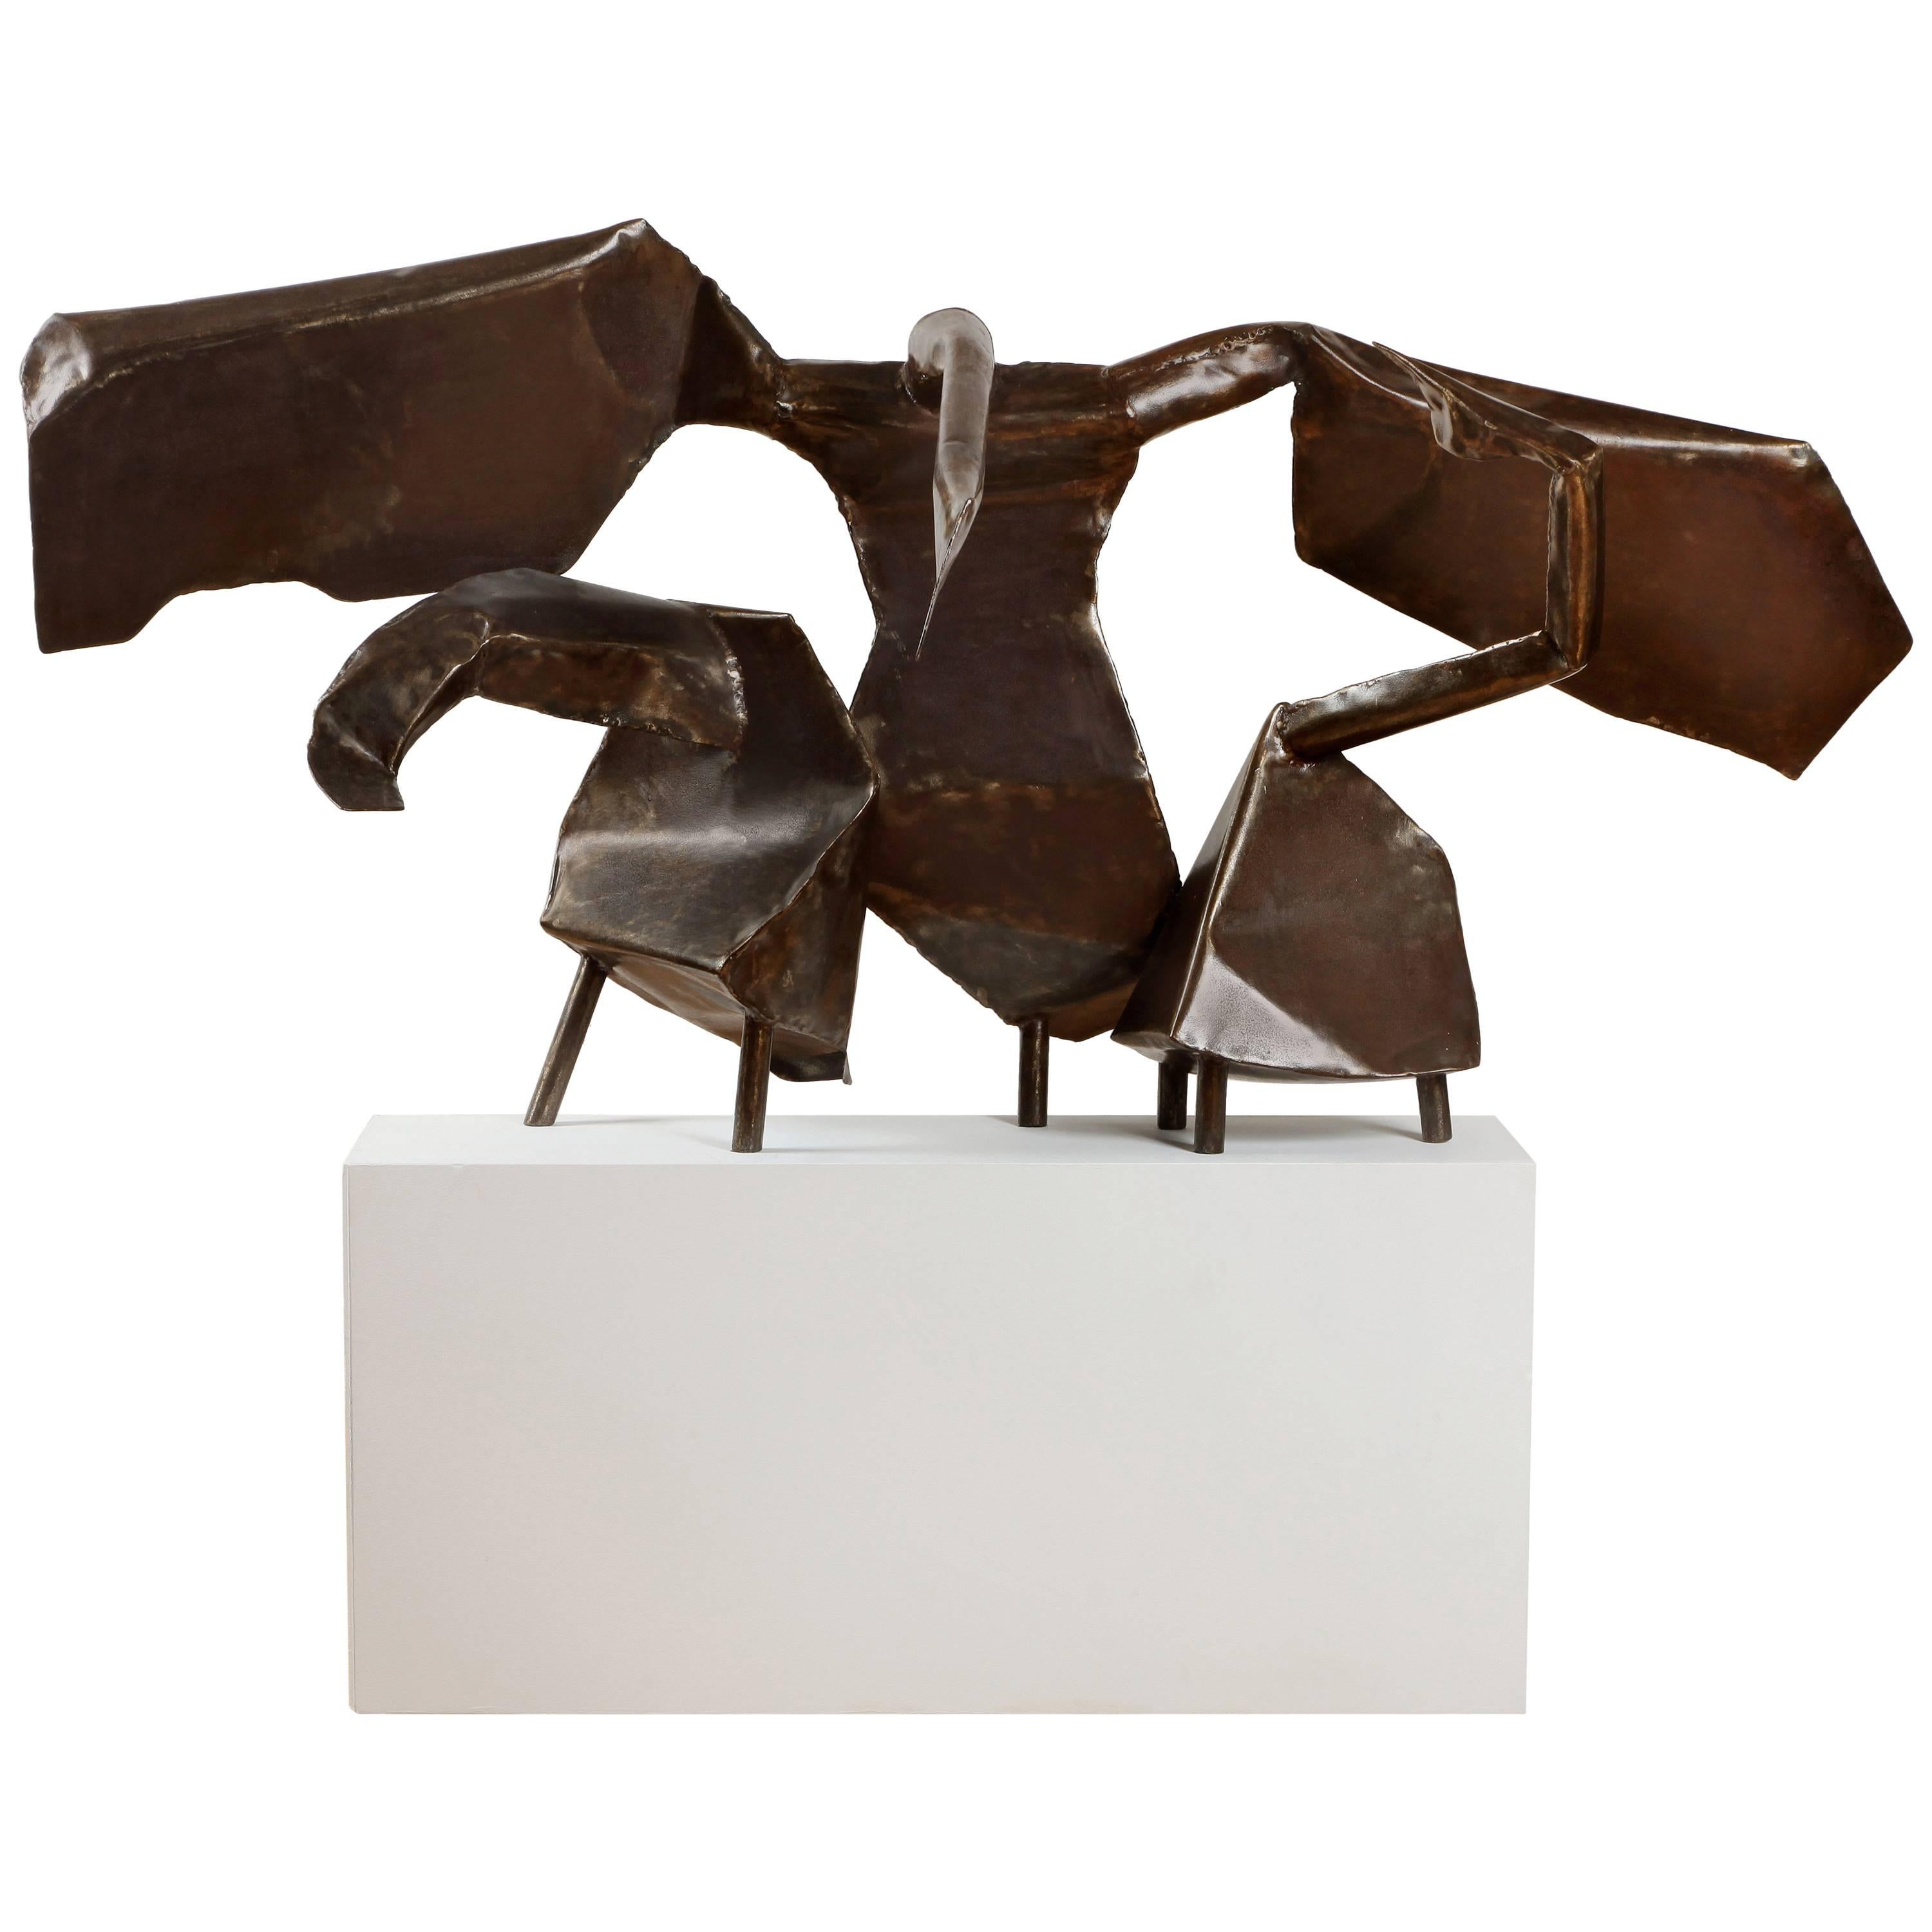 Swans, Big Sculpture by British Artist Joan Moore, 1960s For Sale